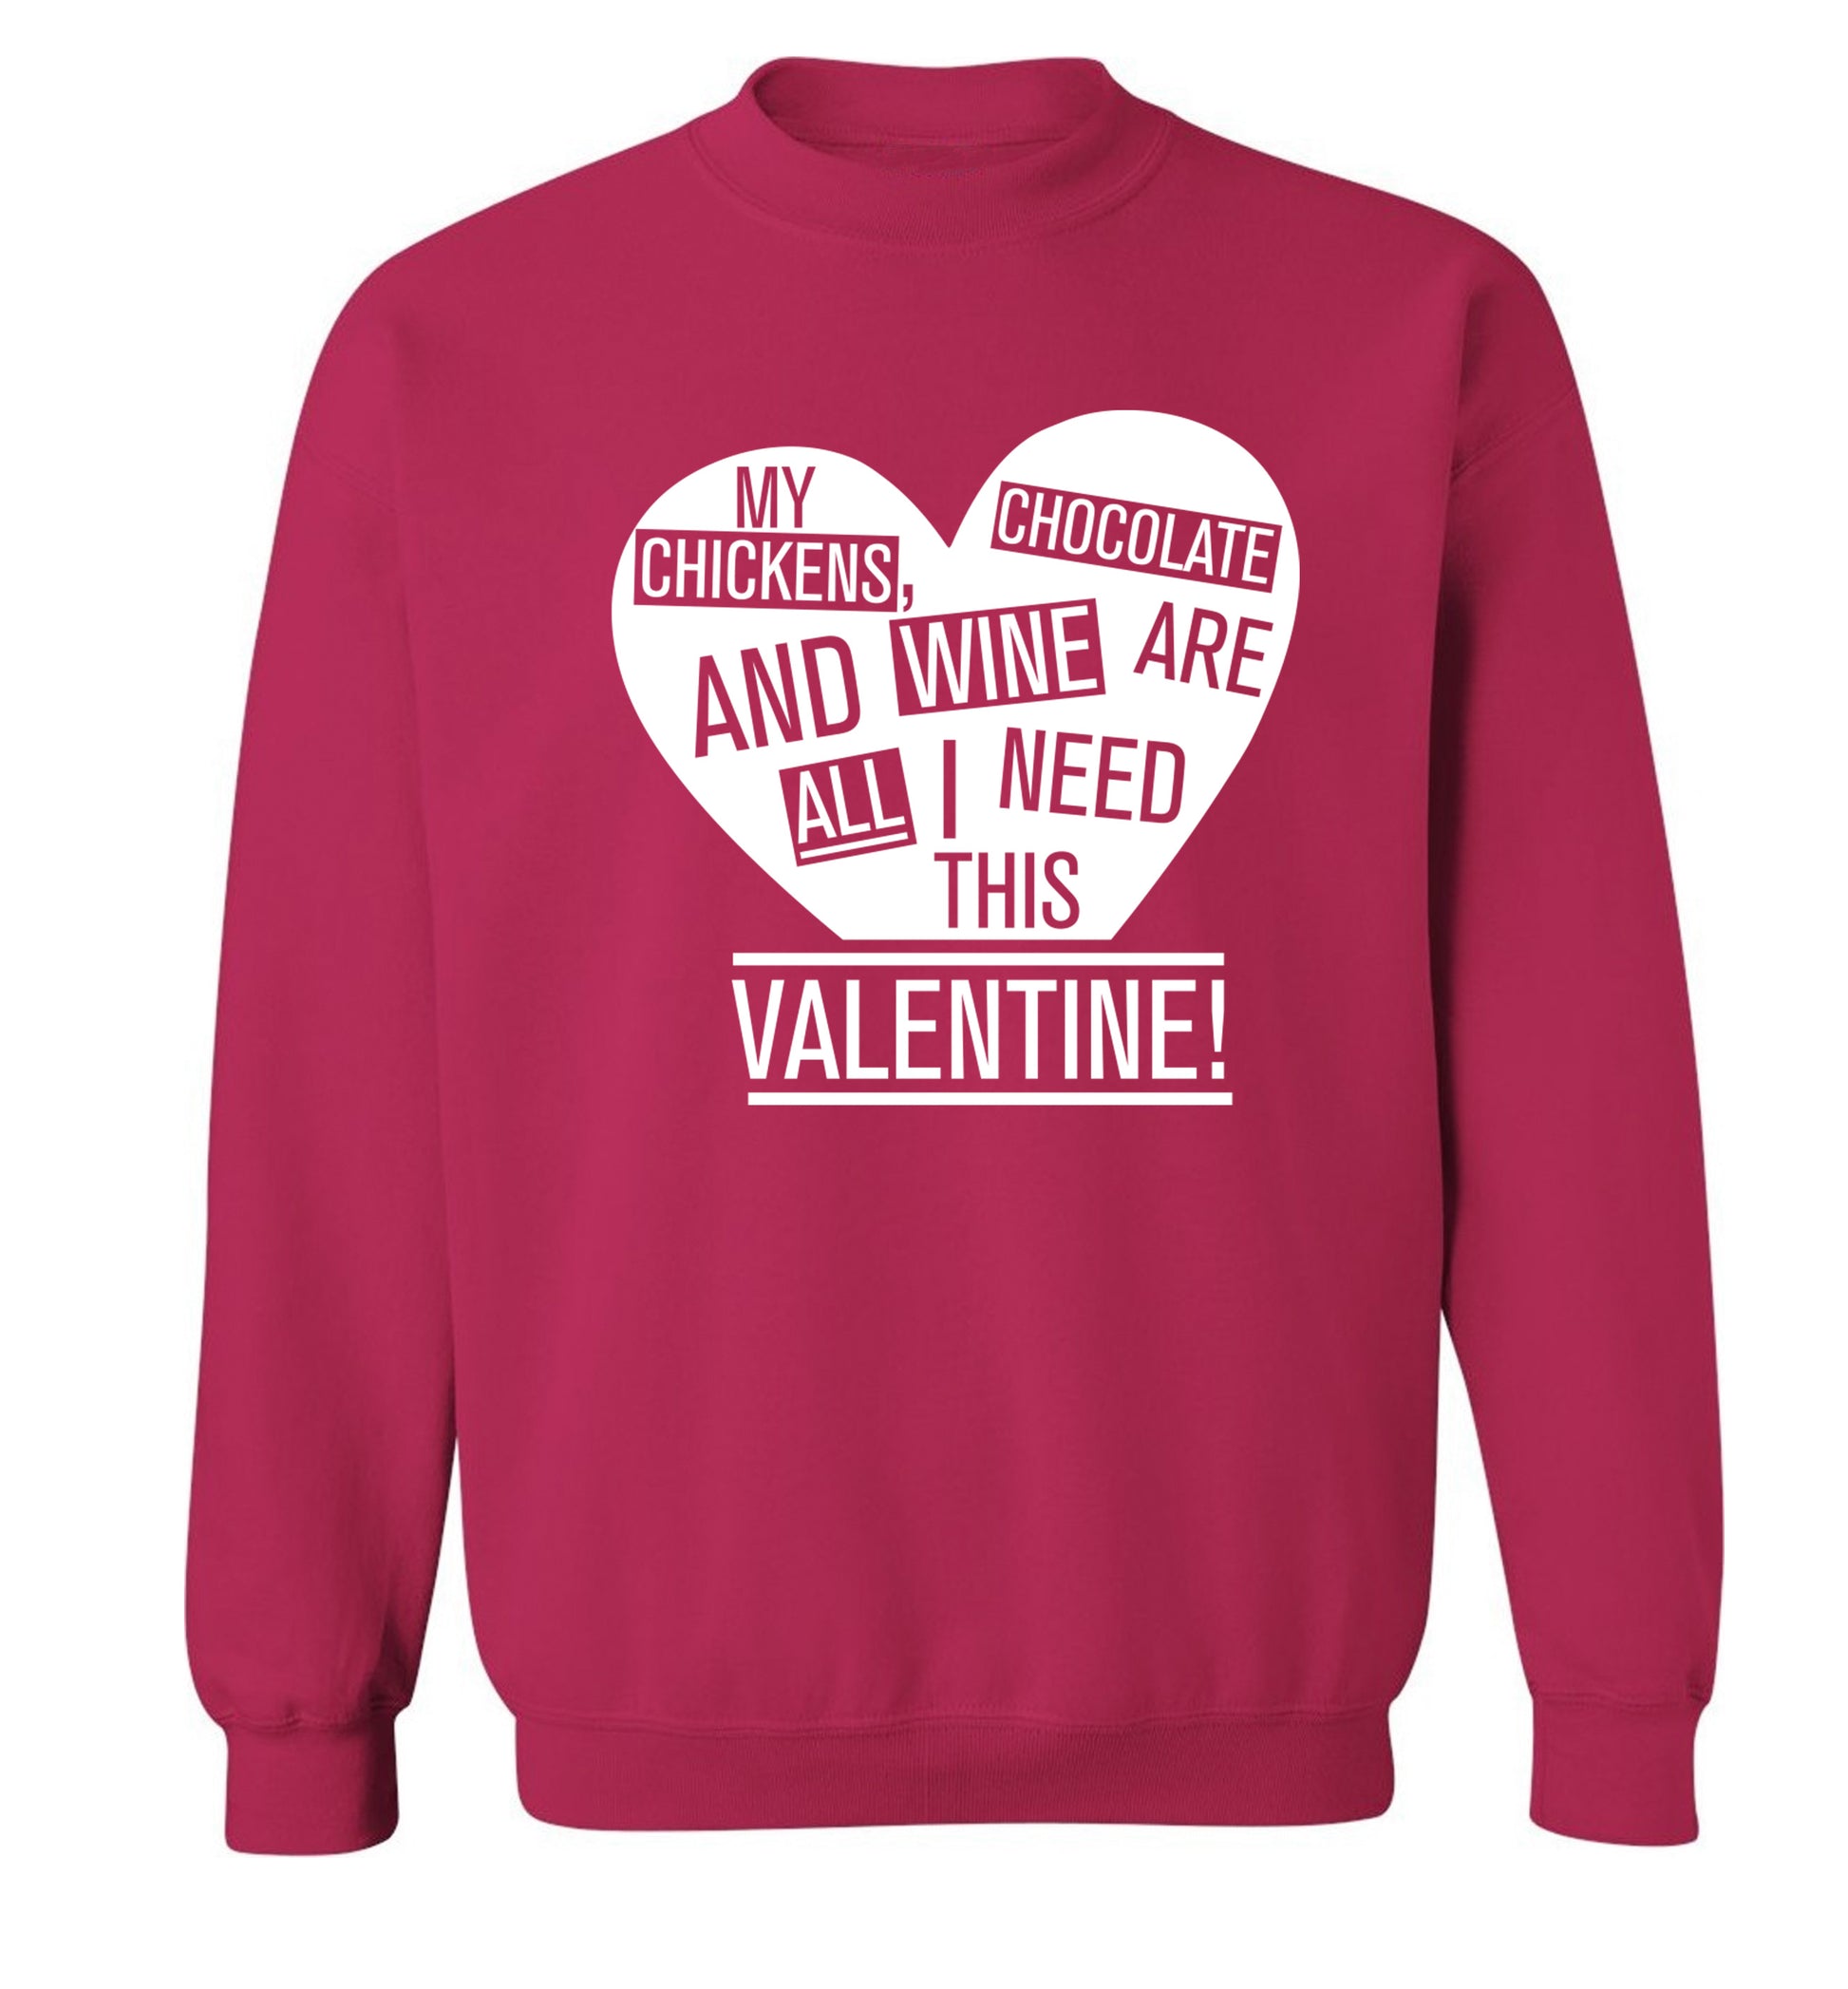 My chickens, chocolate and wine are all I need this valentine! Adult's unisex pink Sweater 2XL